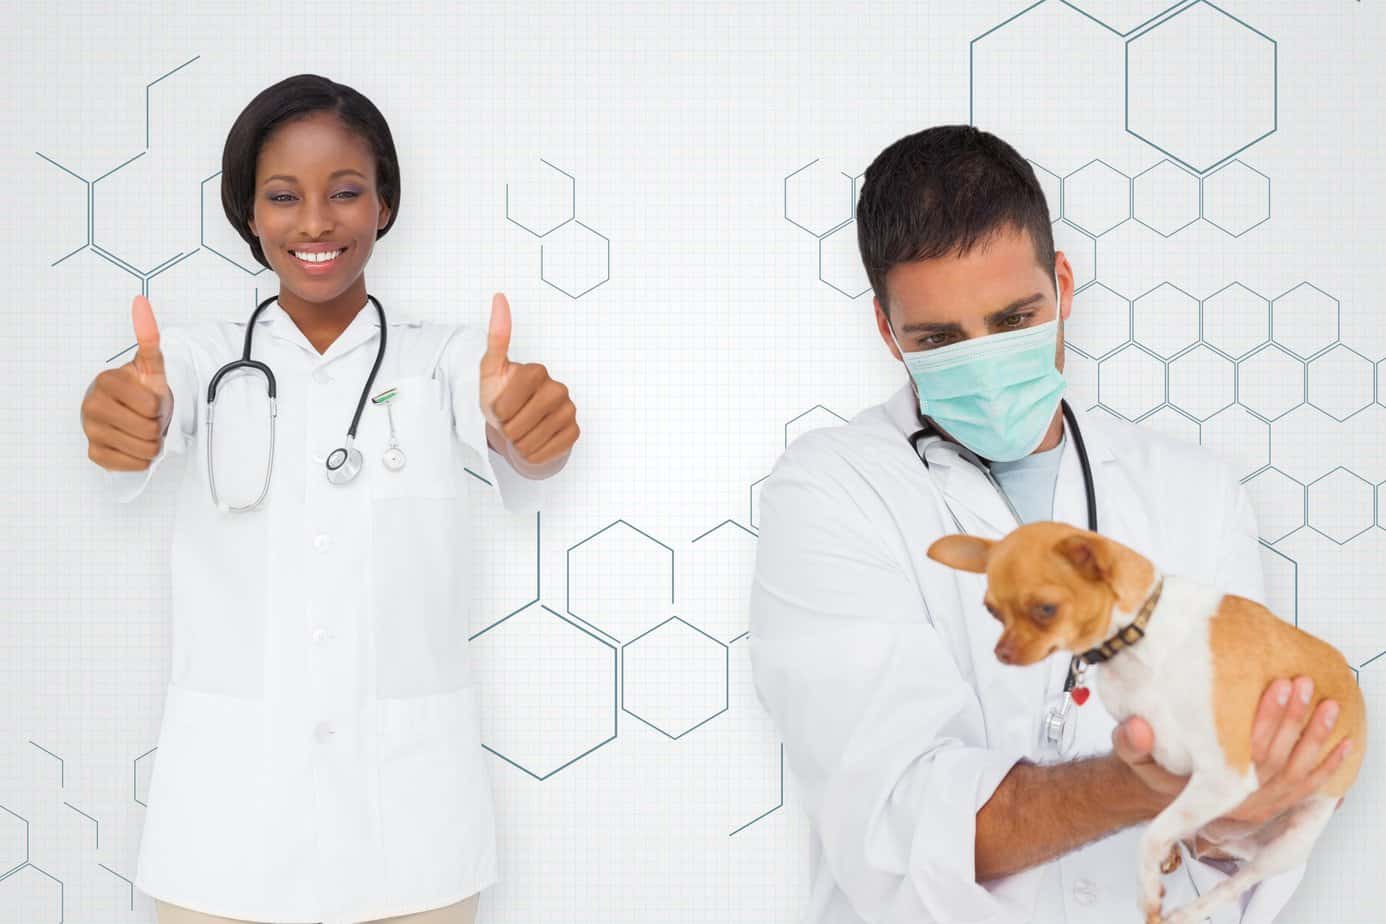 How Long Does It Take To A Veterinarian?